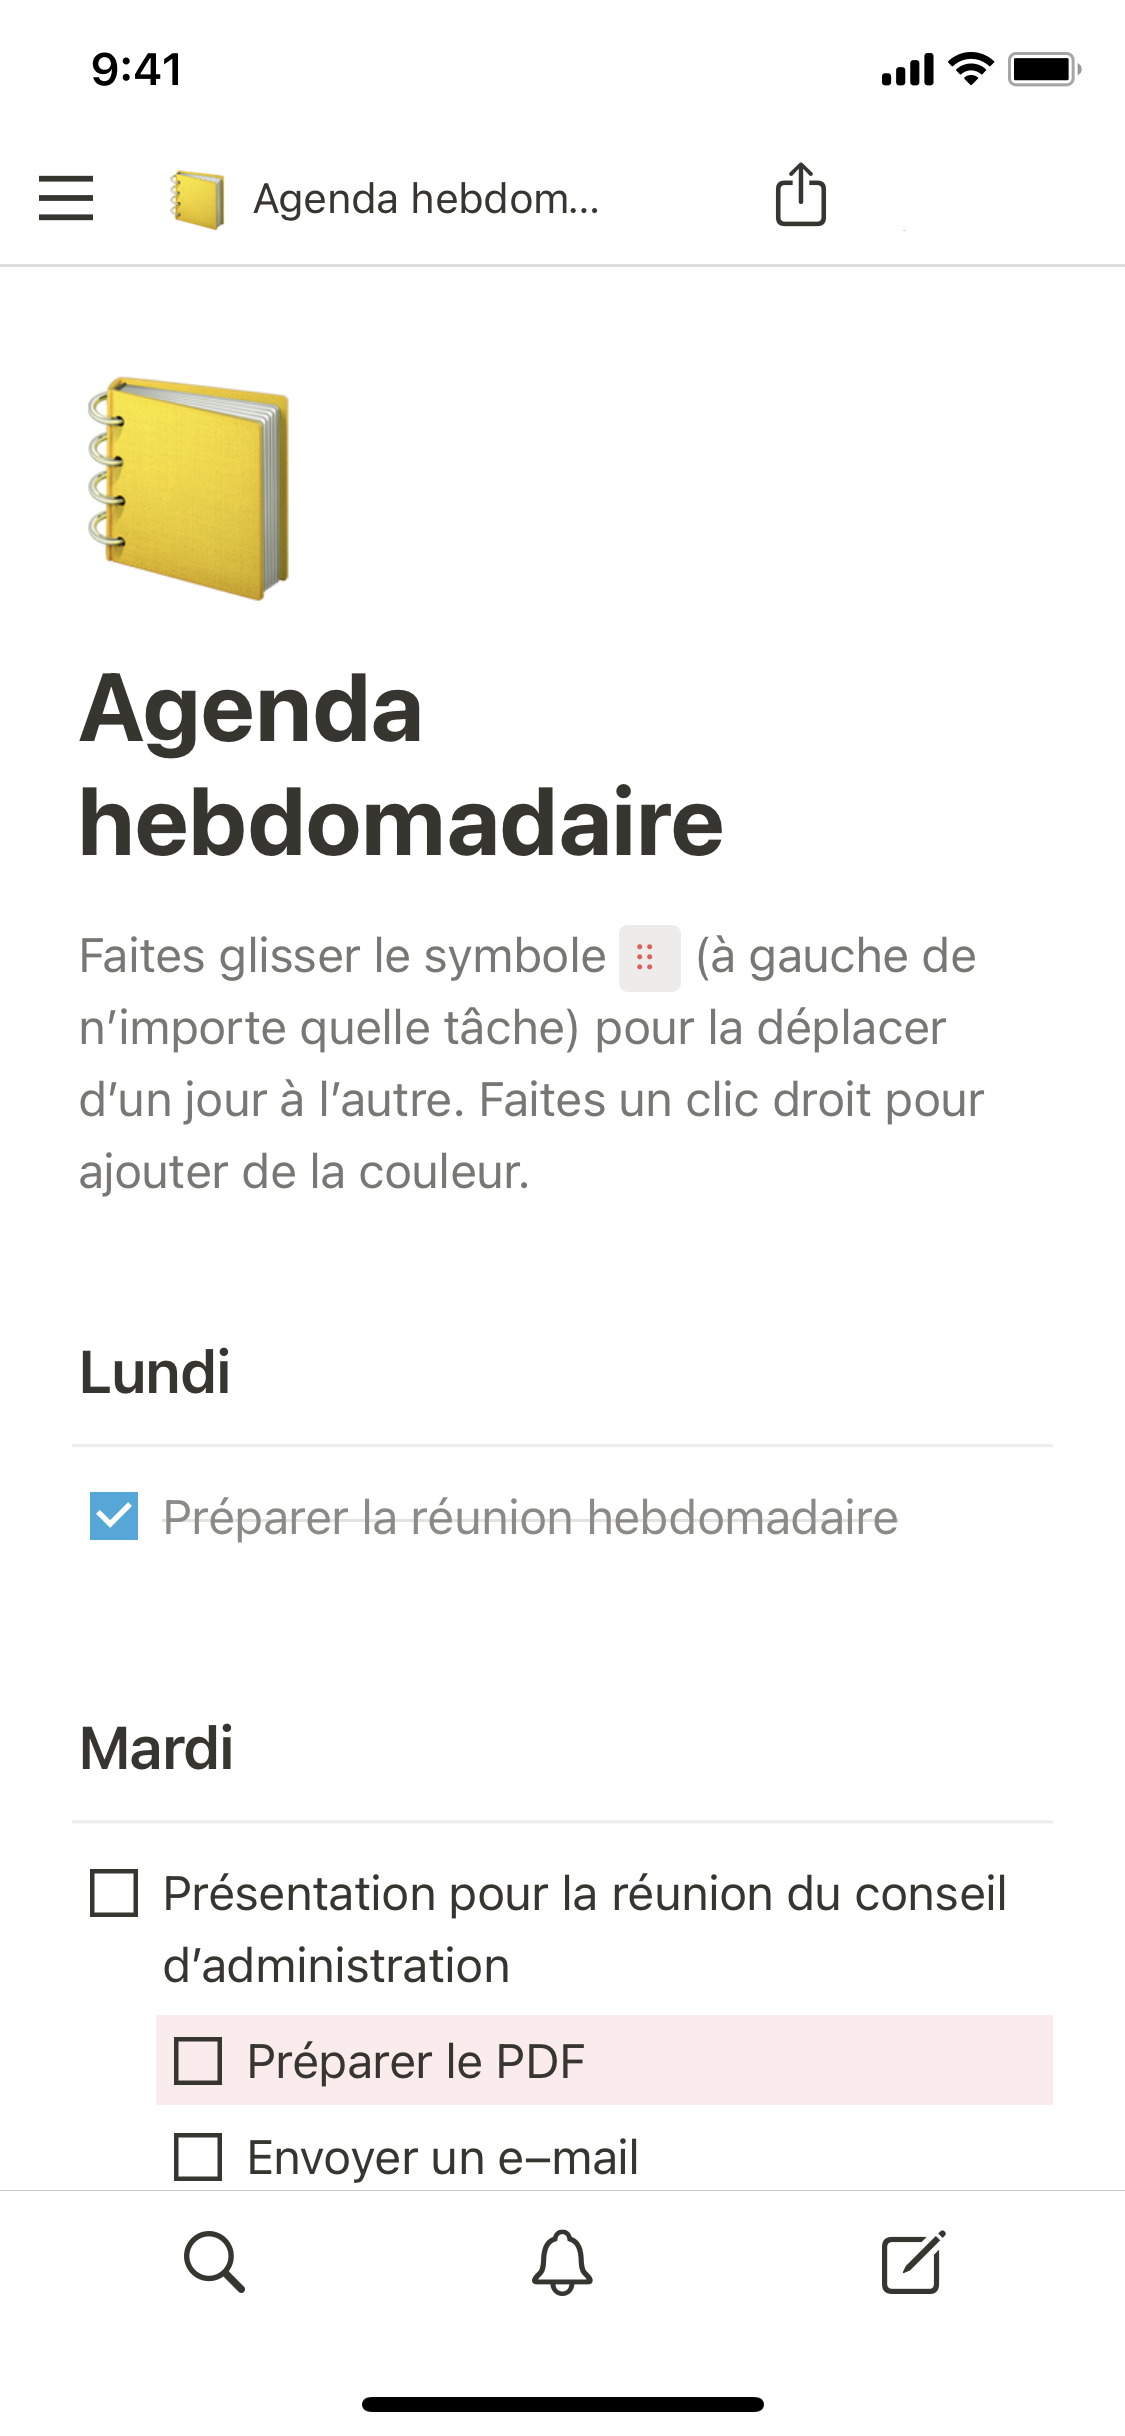 The mobile image for the Weekly agenda template